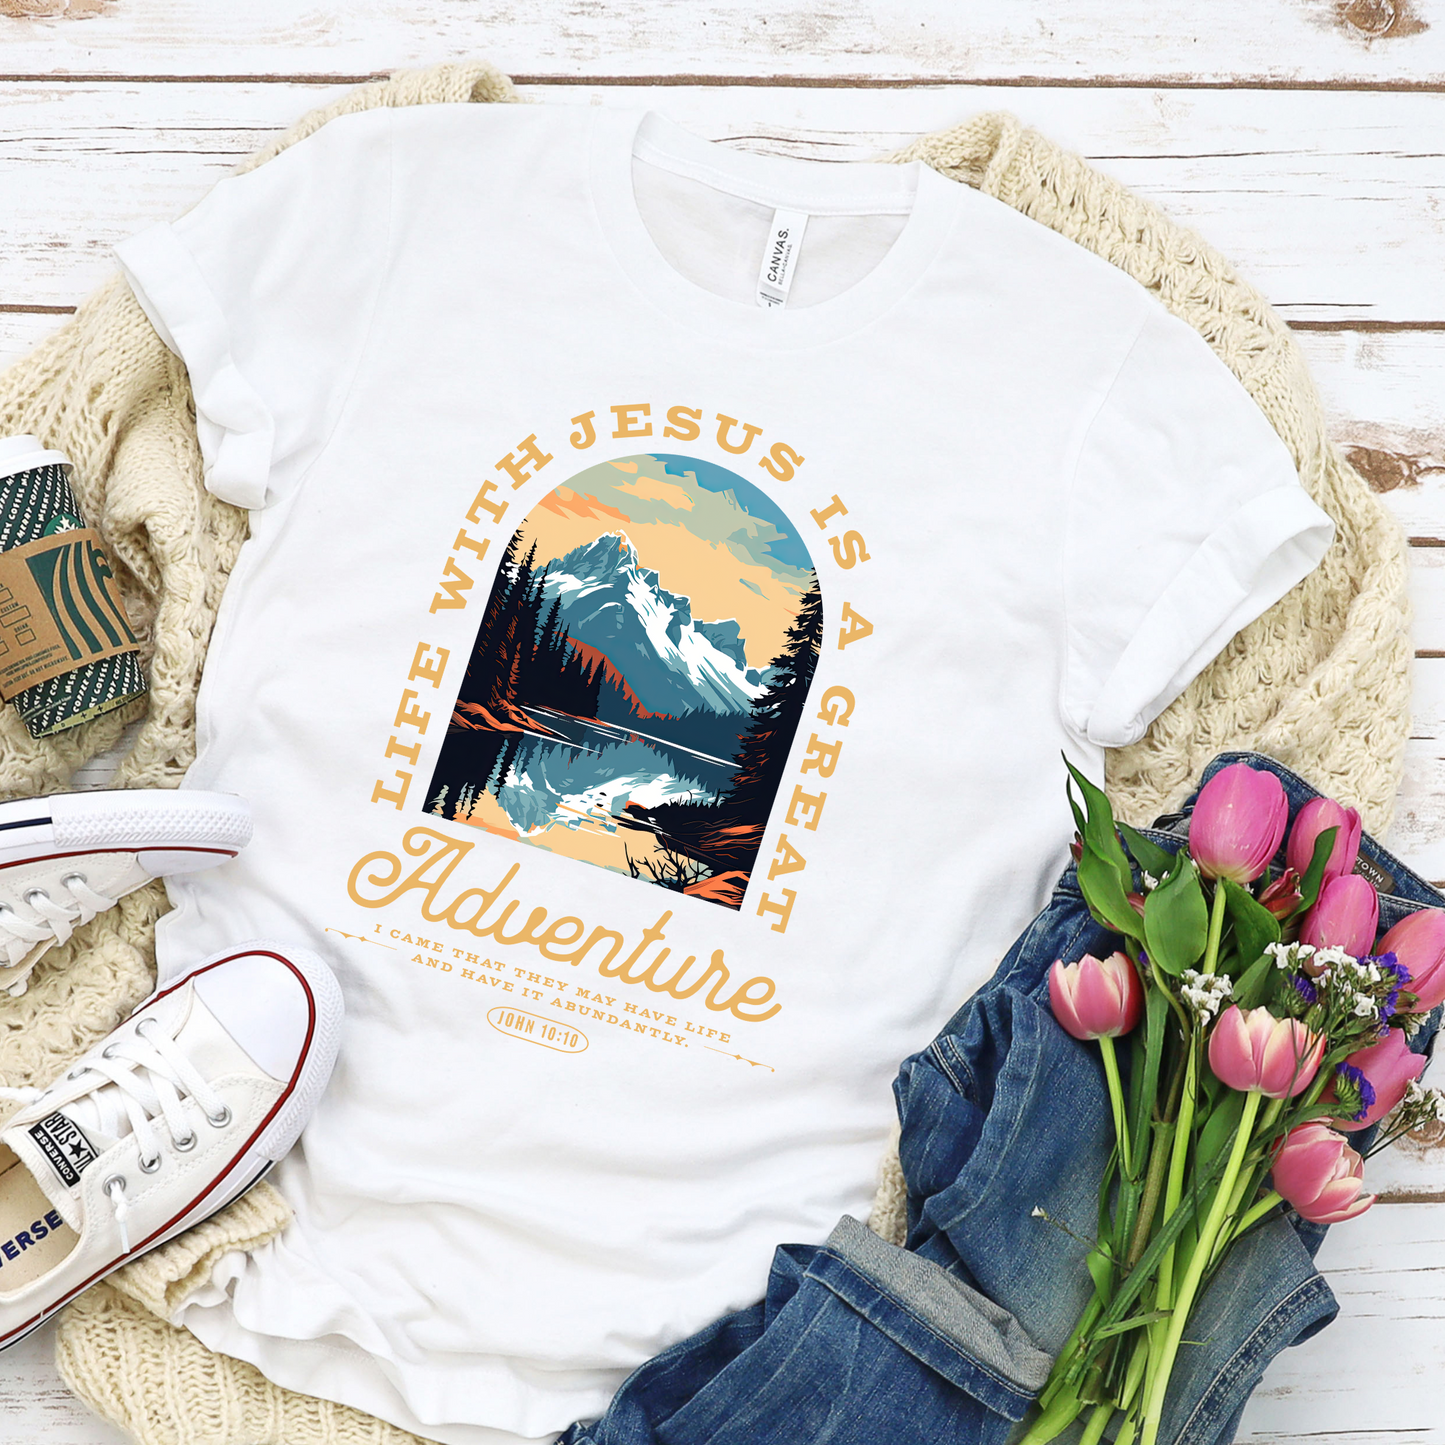 Life with Jesus is a great adventure tee - Additional colors